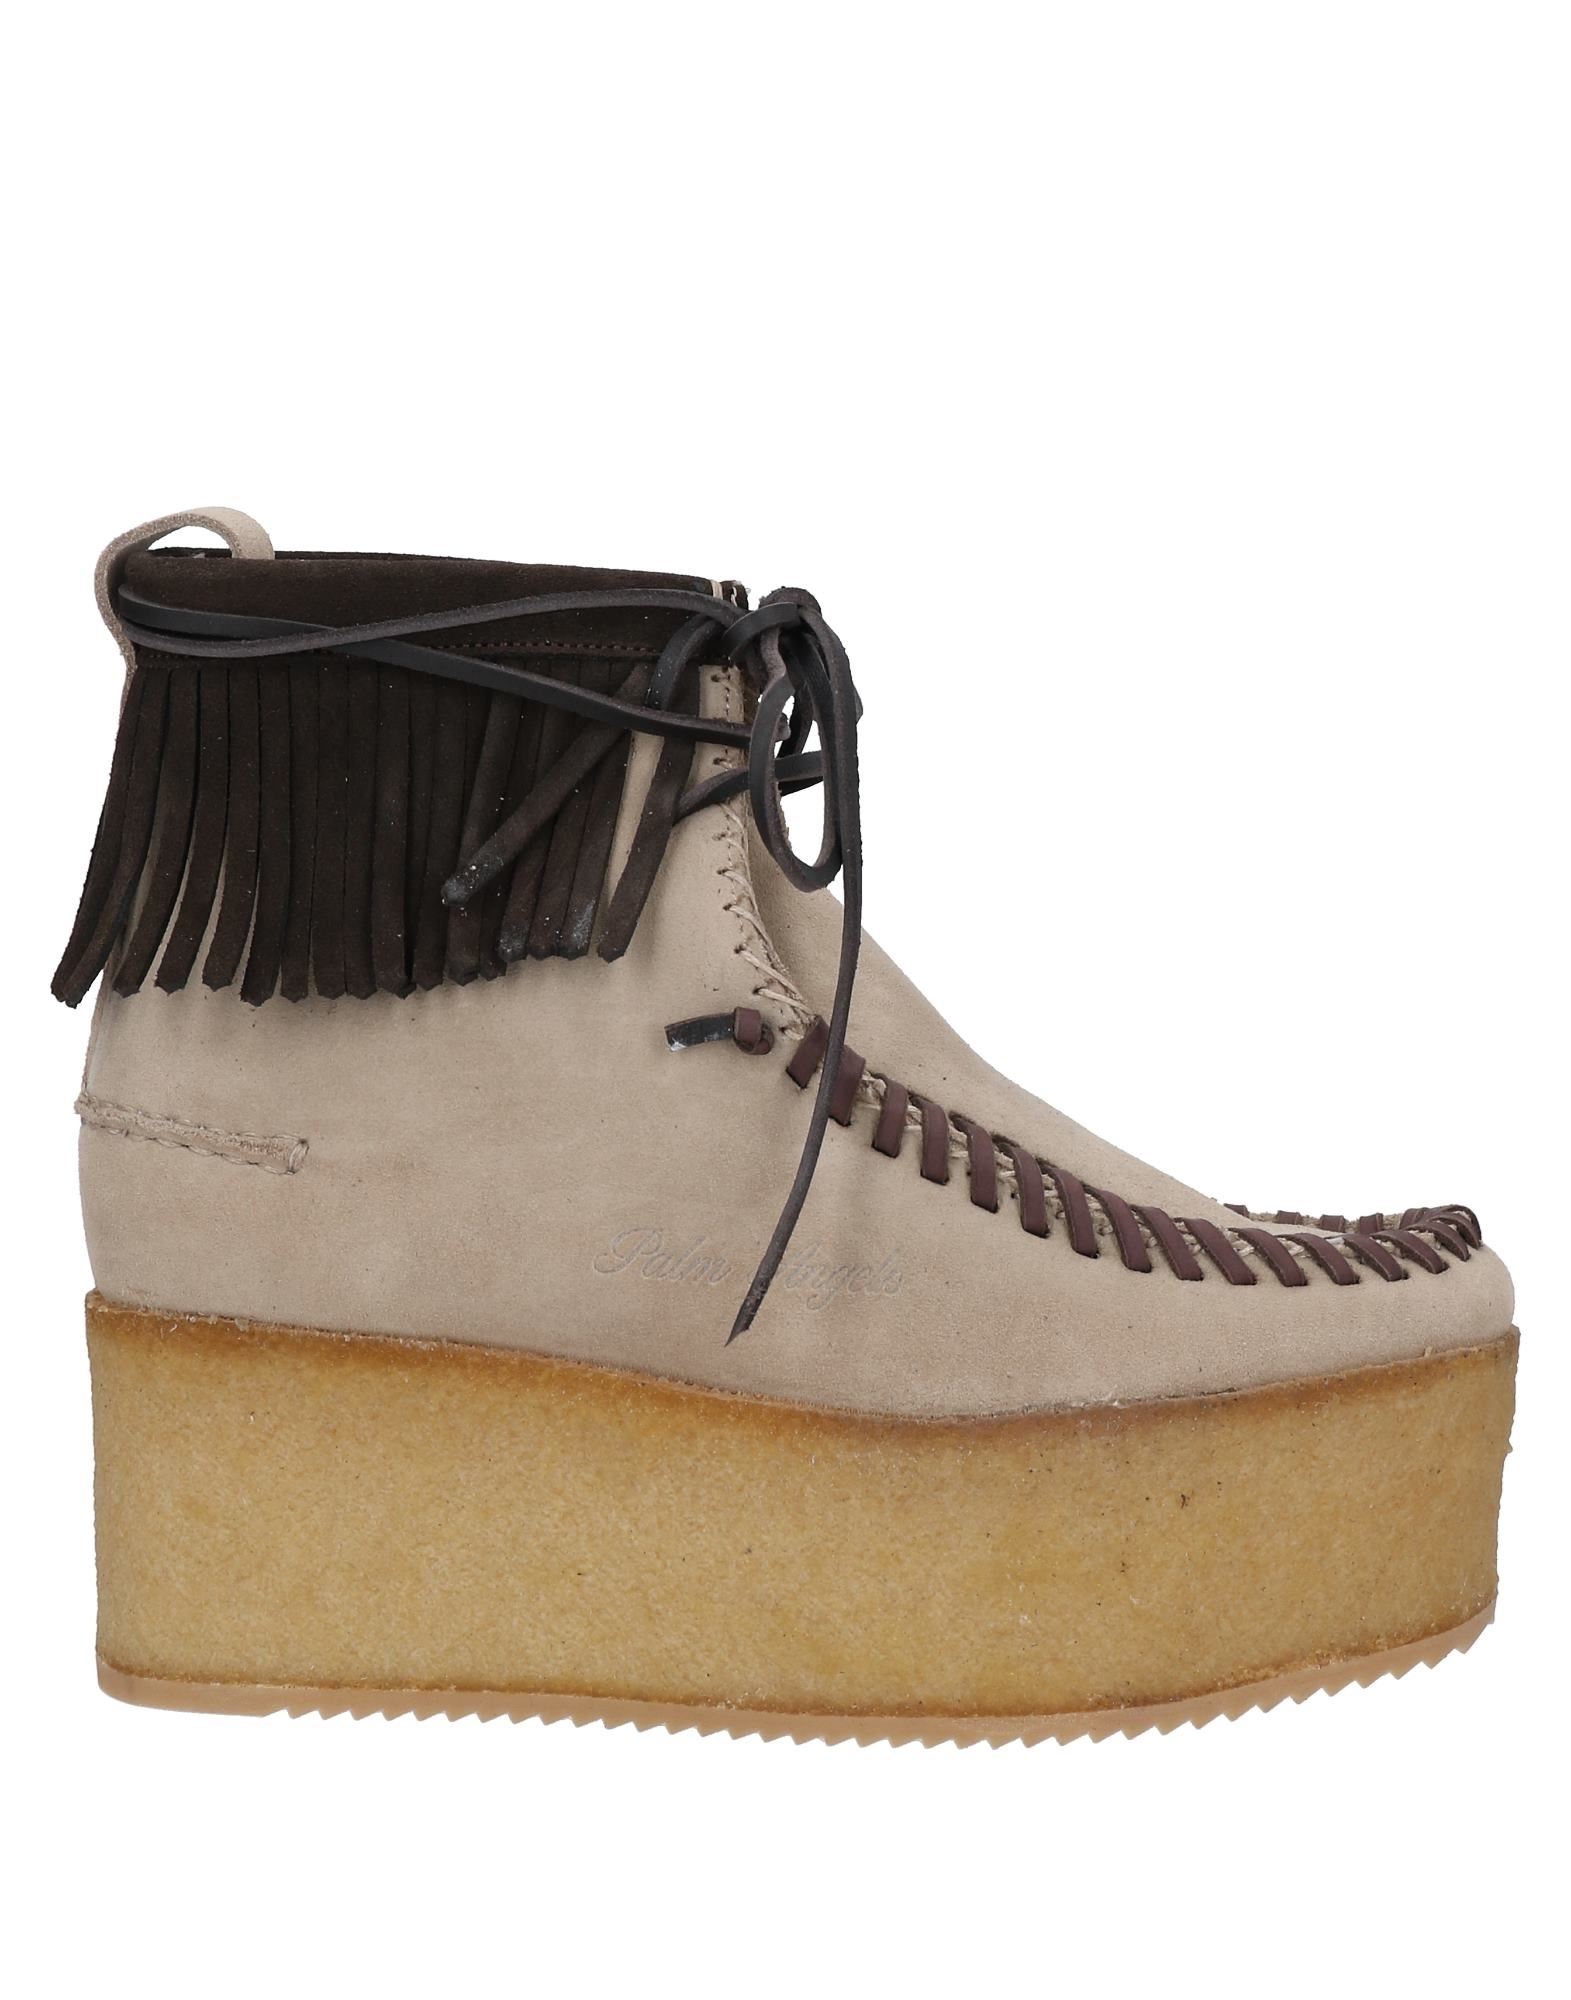 PALM ANGELS PALM ANGELS X CLARKS ORIGINALS WOMAN ANKLE BOOTS SAND SIZE 9 SOFT LEATHER,17031386GC 3